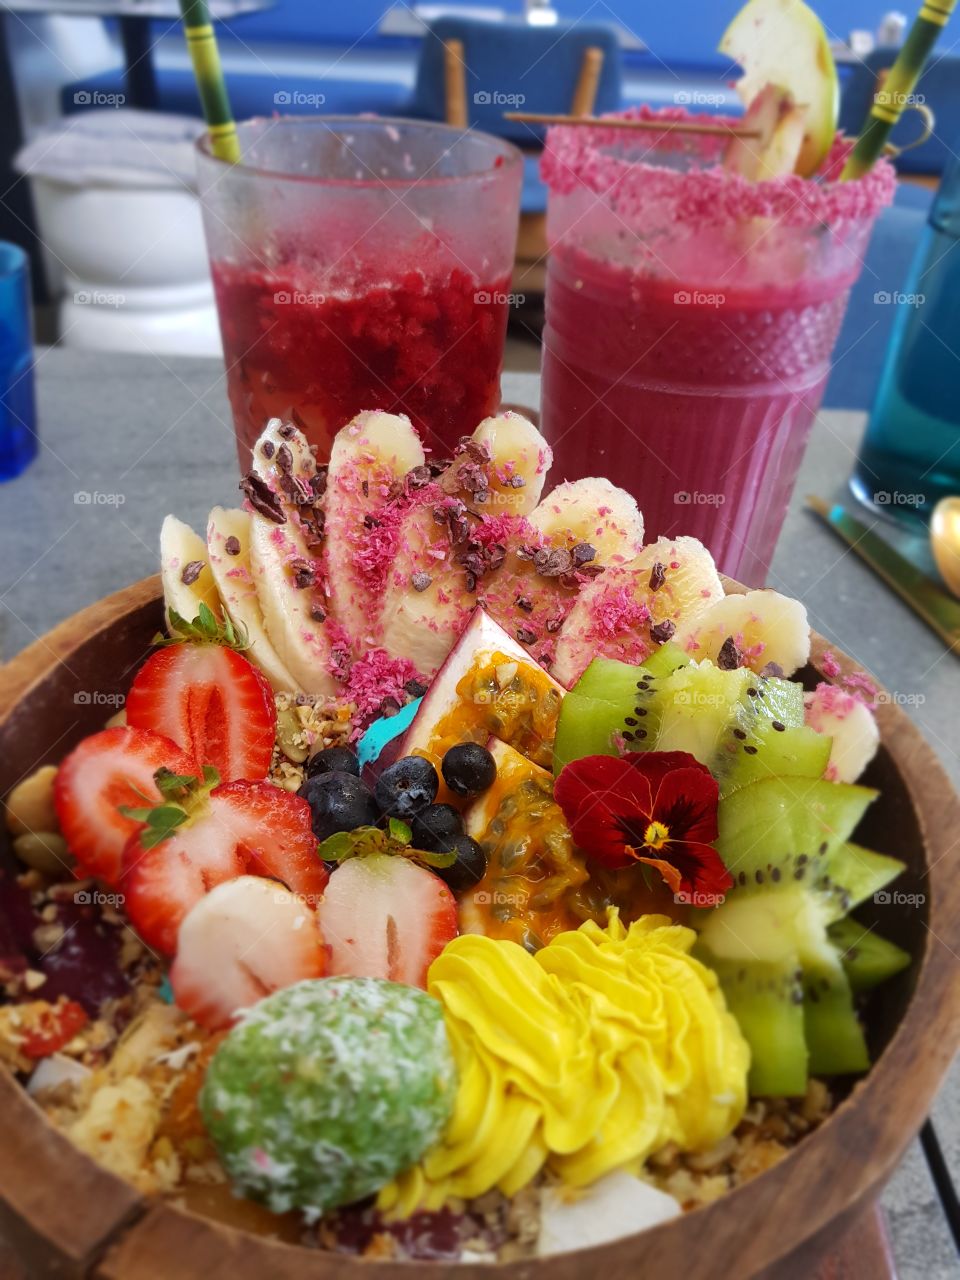 Acai Bowl Moctail and Smoothie